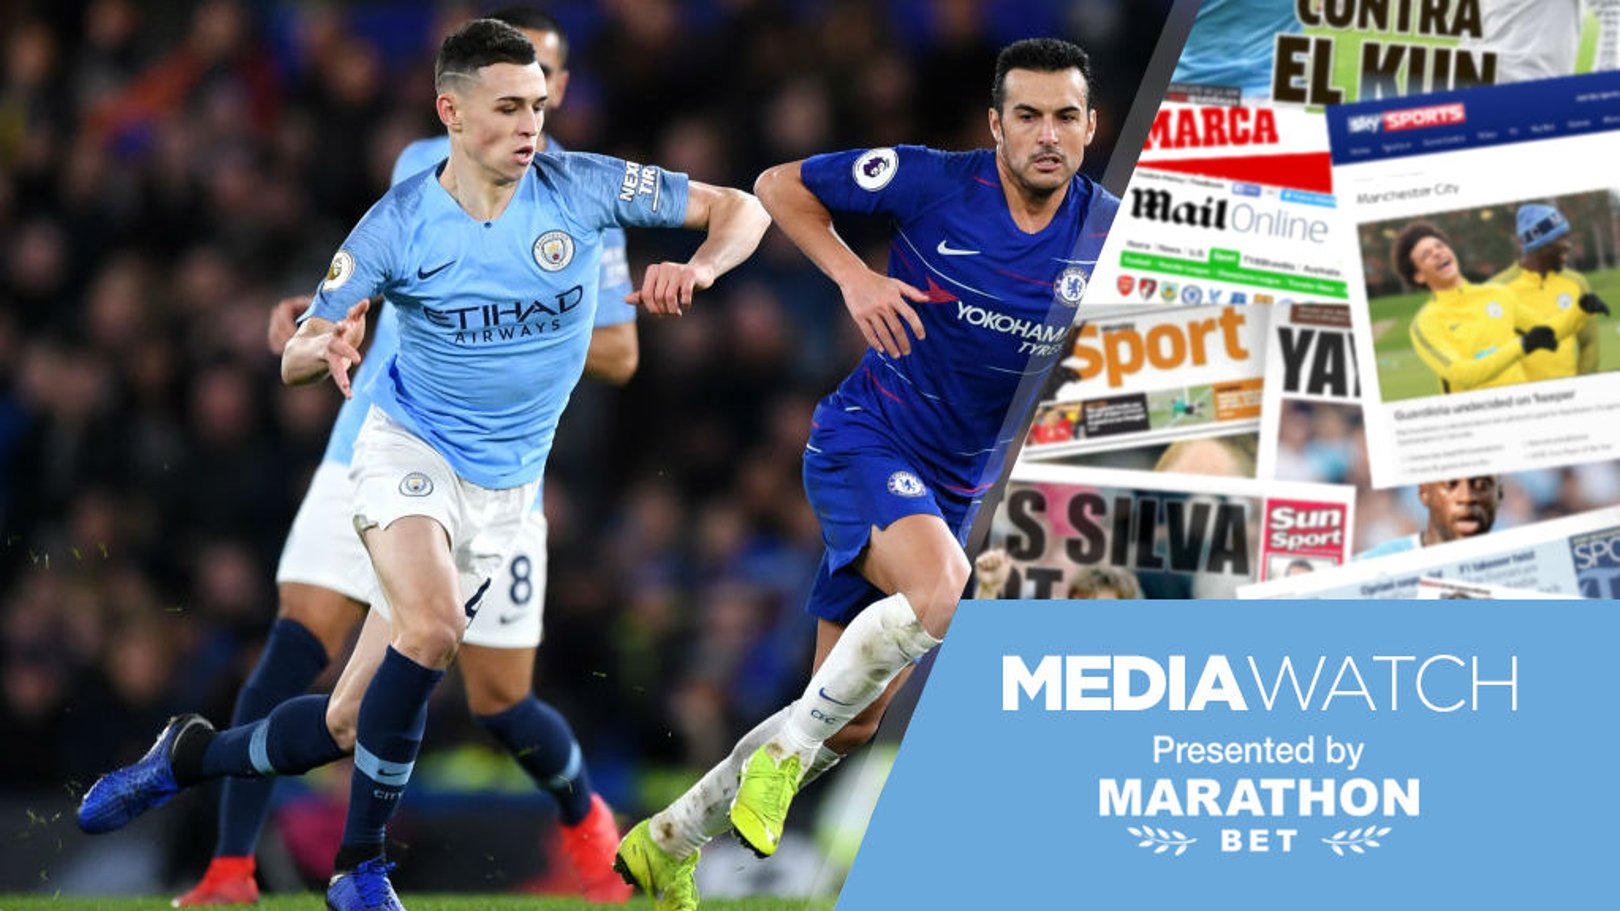 Media watch: Chelsea 'lesson' and FA WSL preview